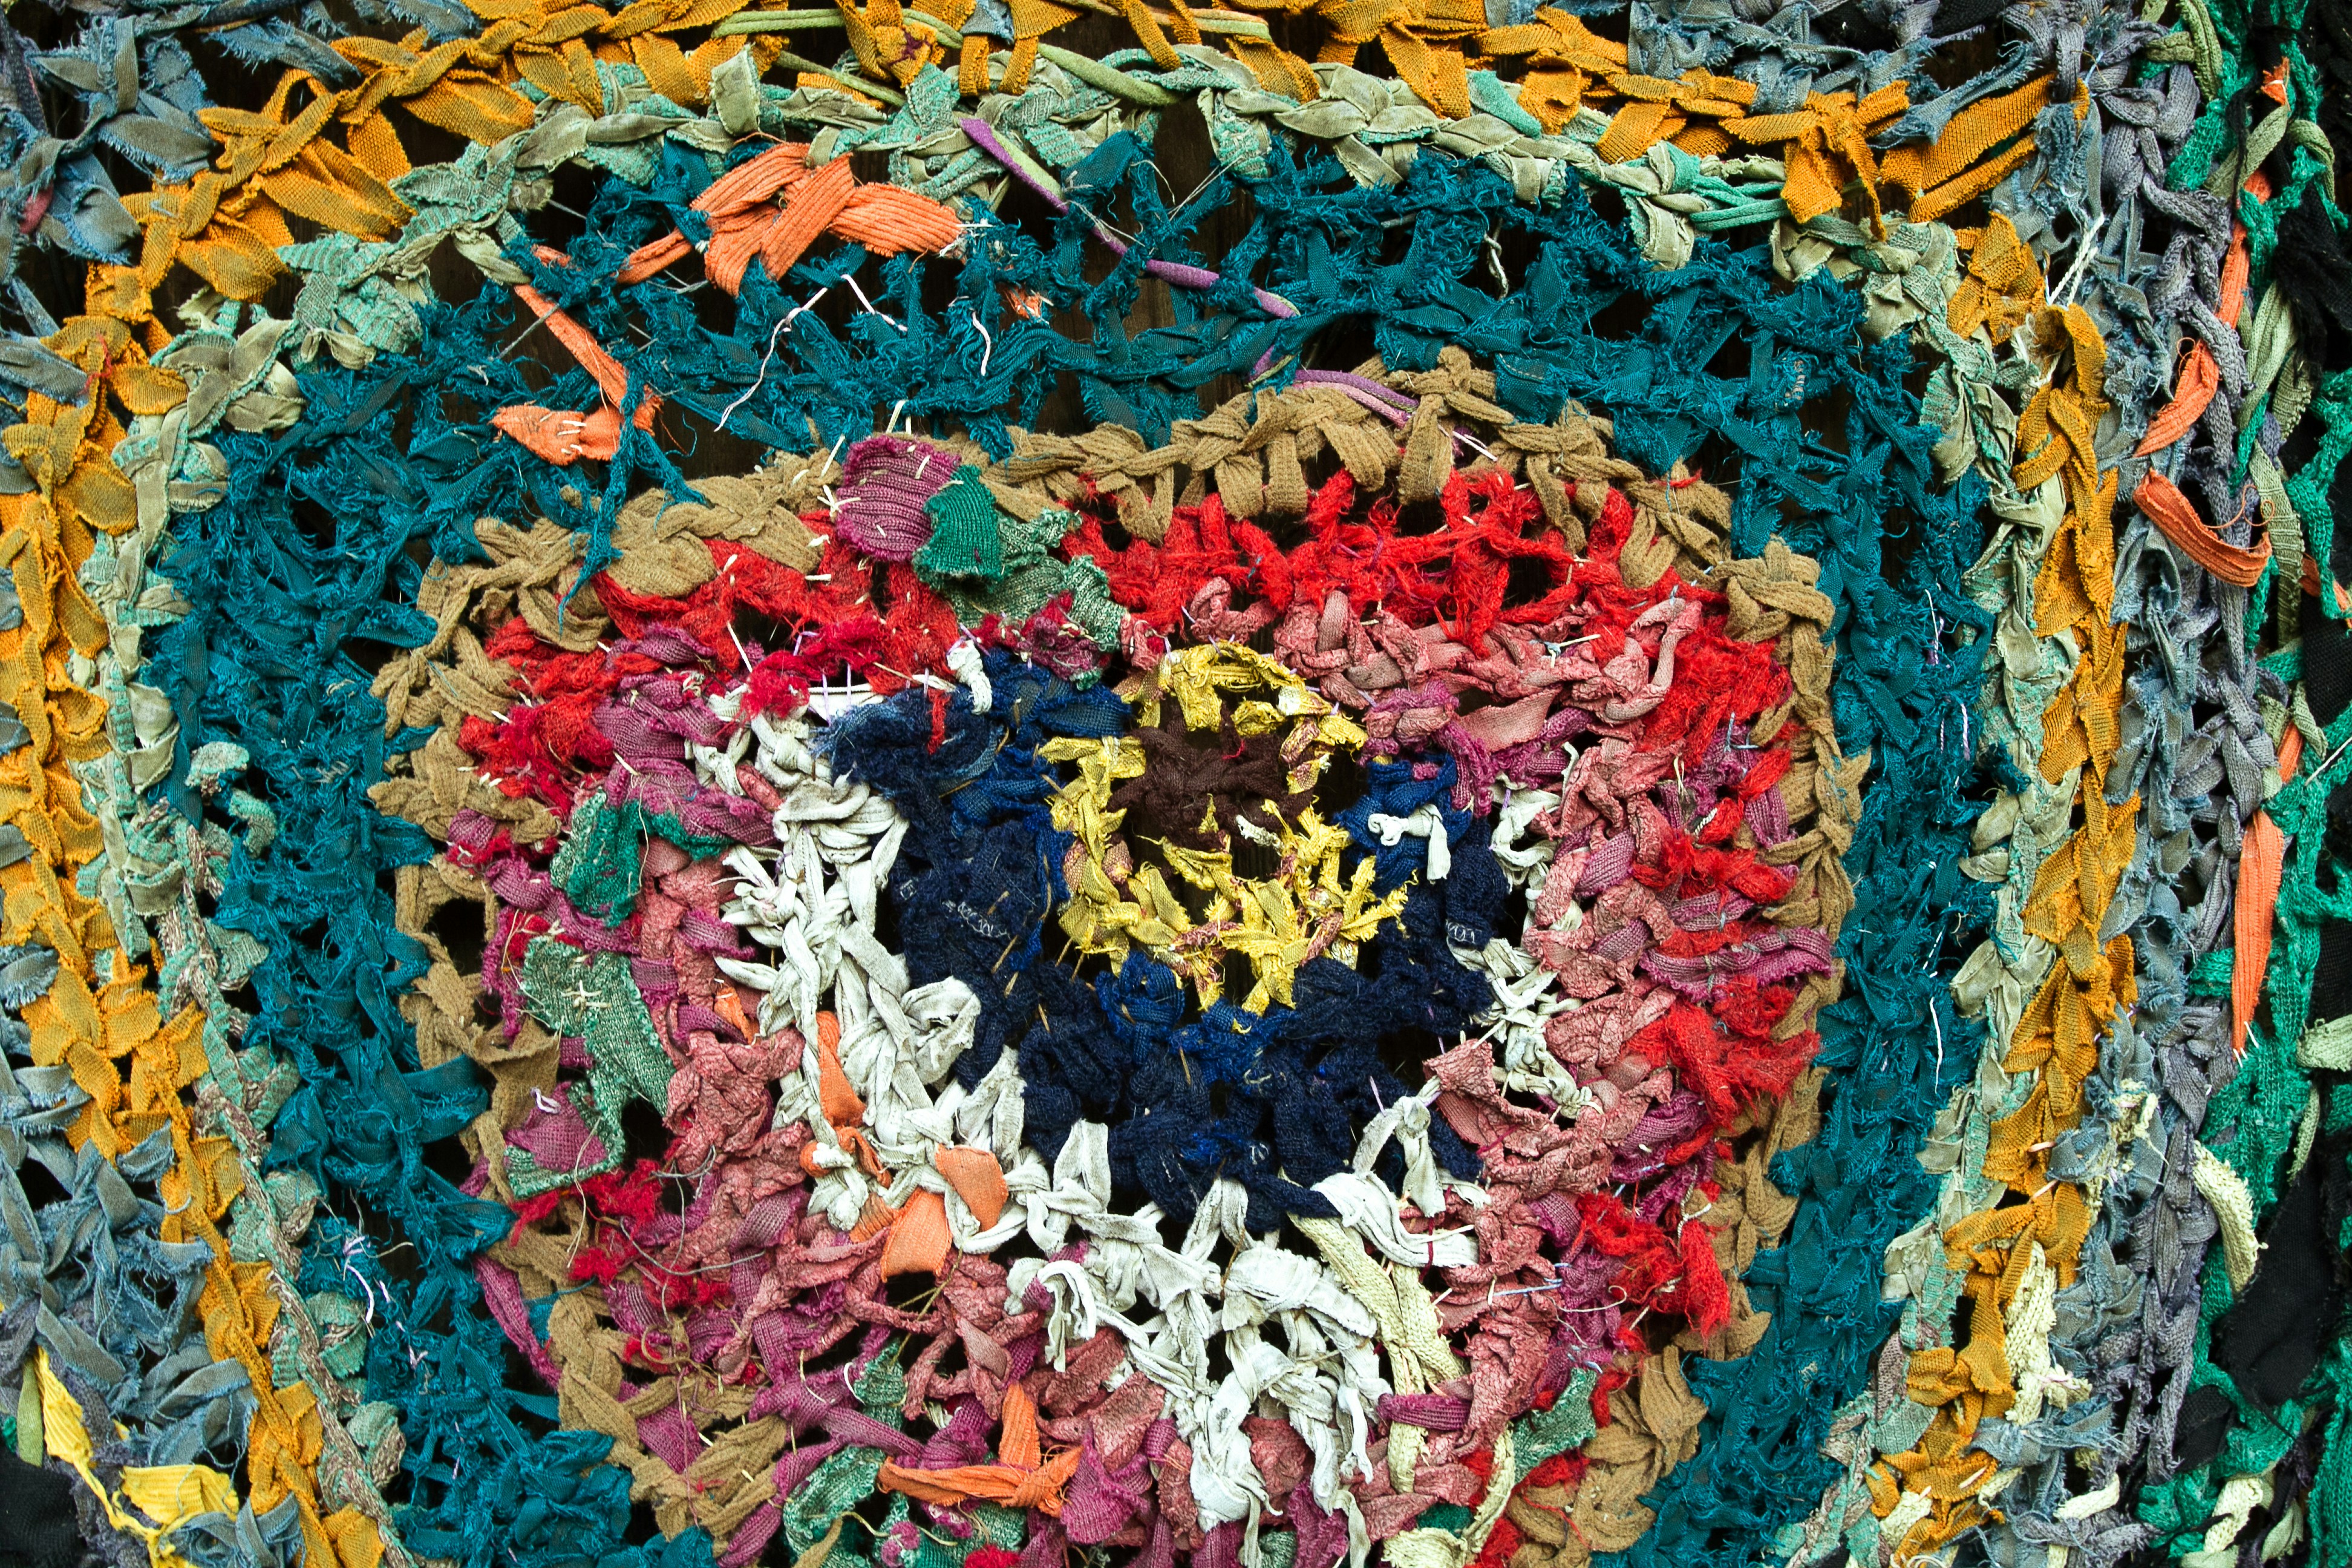 Colorful round handmade floor carpet mat made of ribbons and rags